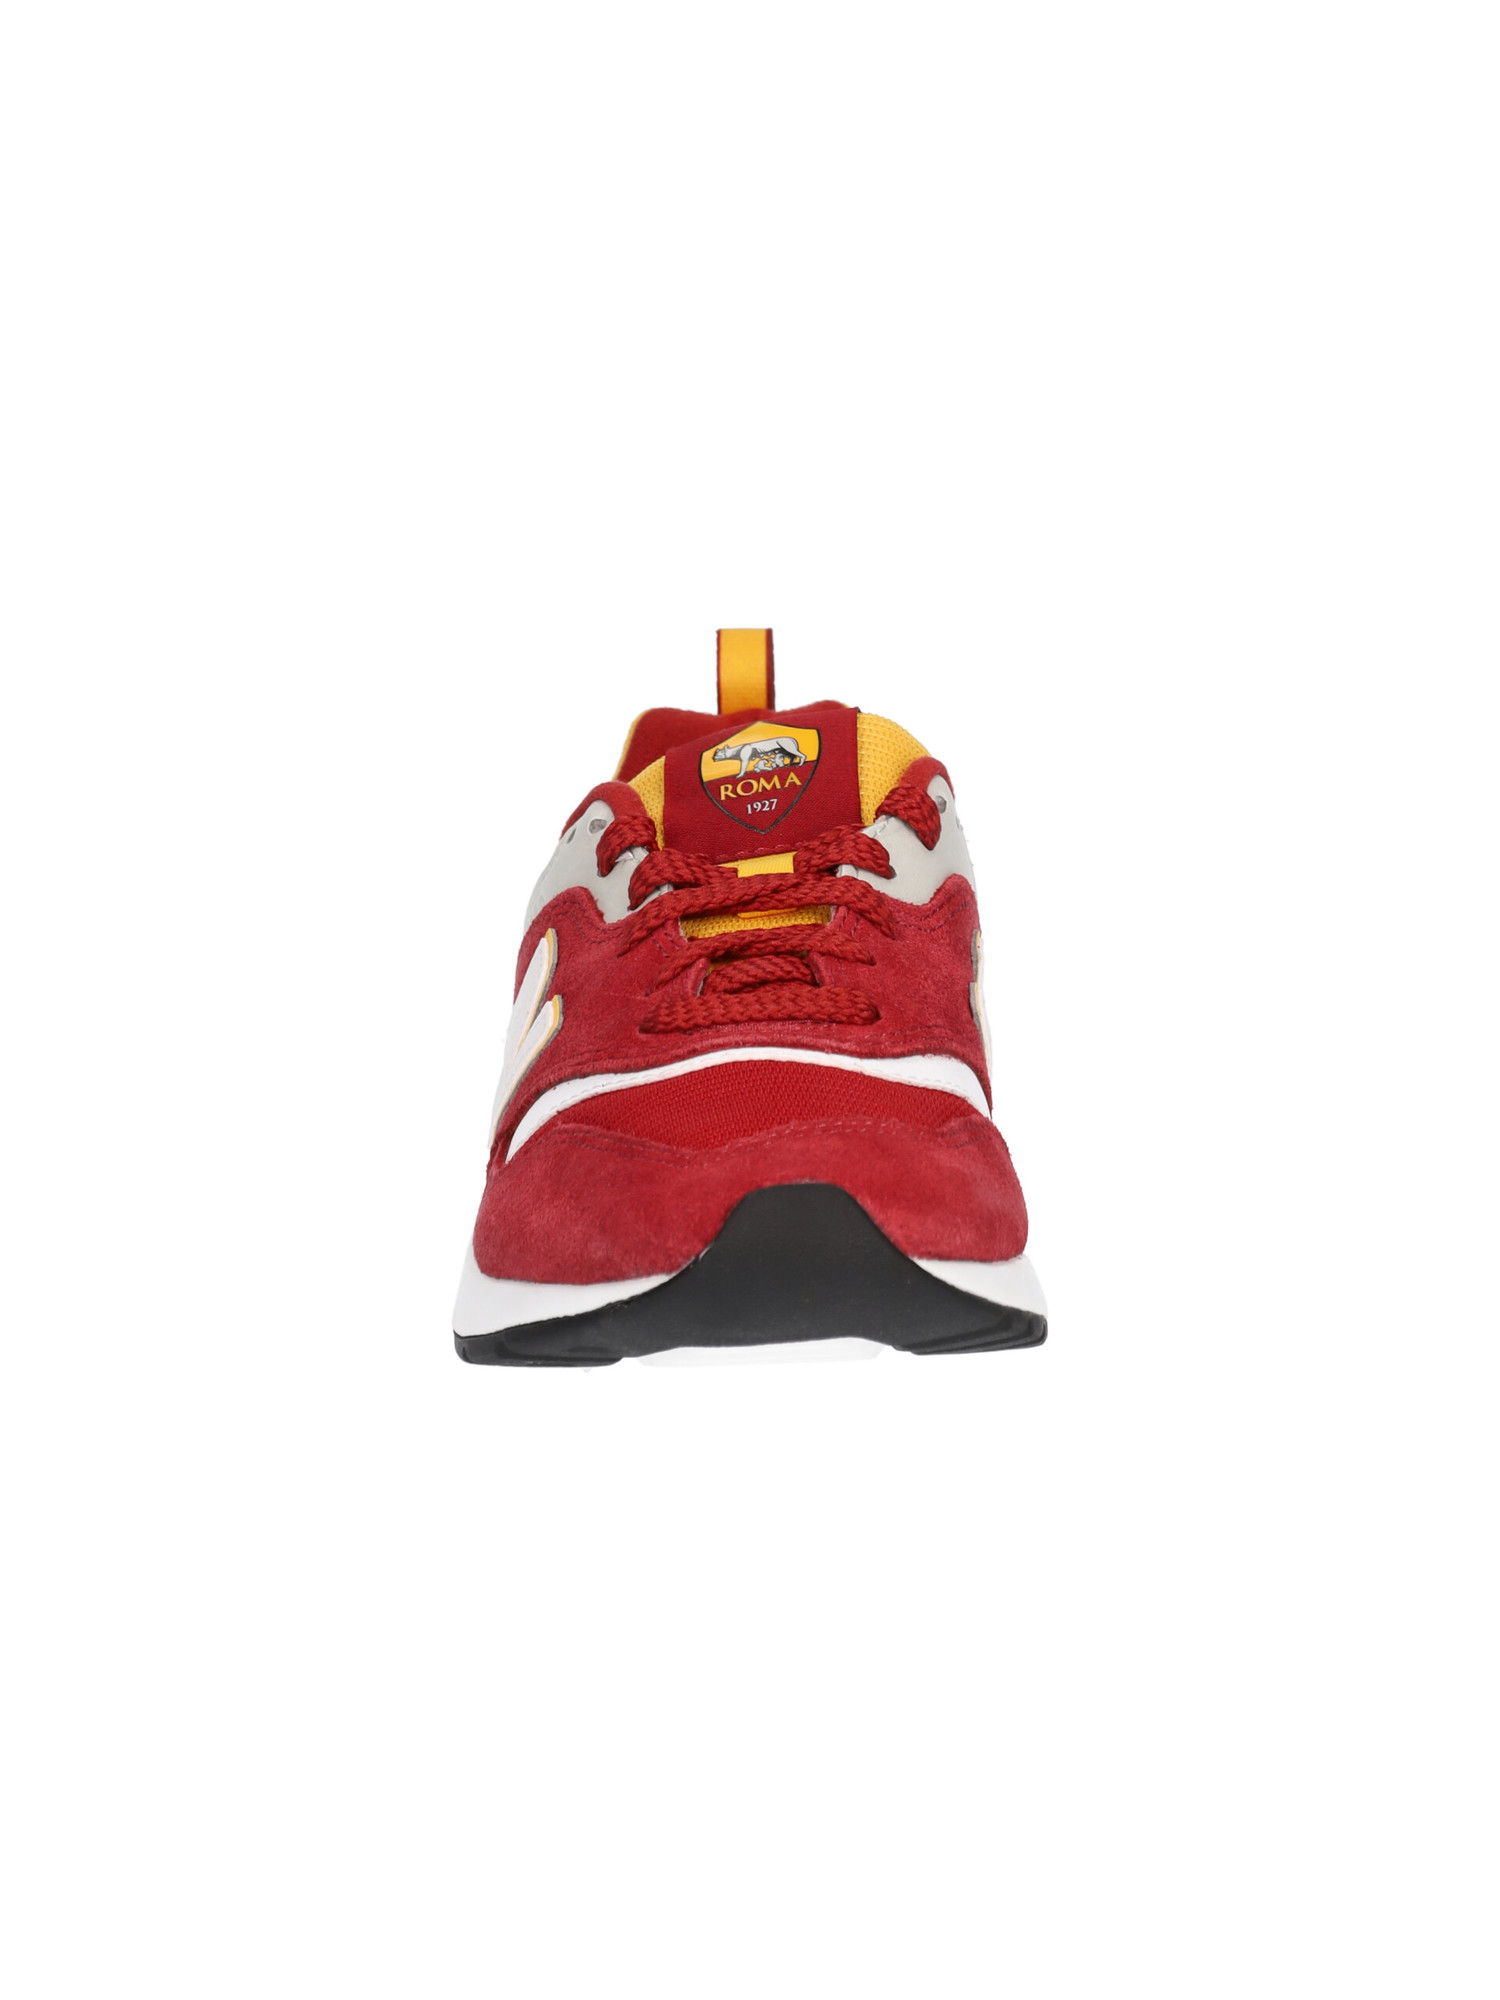 sneaker-as-roma-by-new-balance-rossa